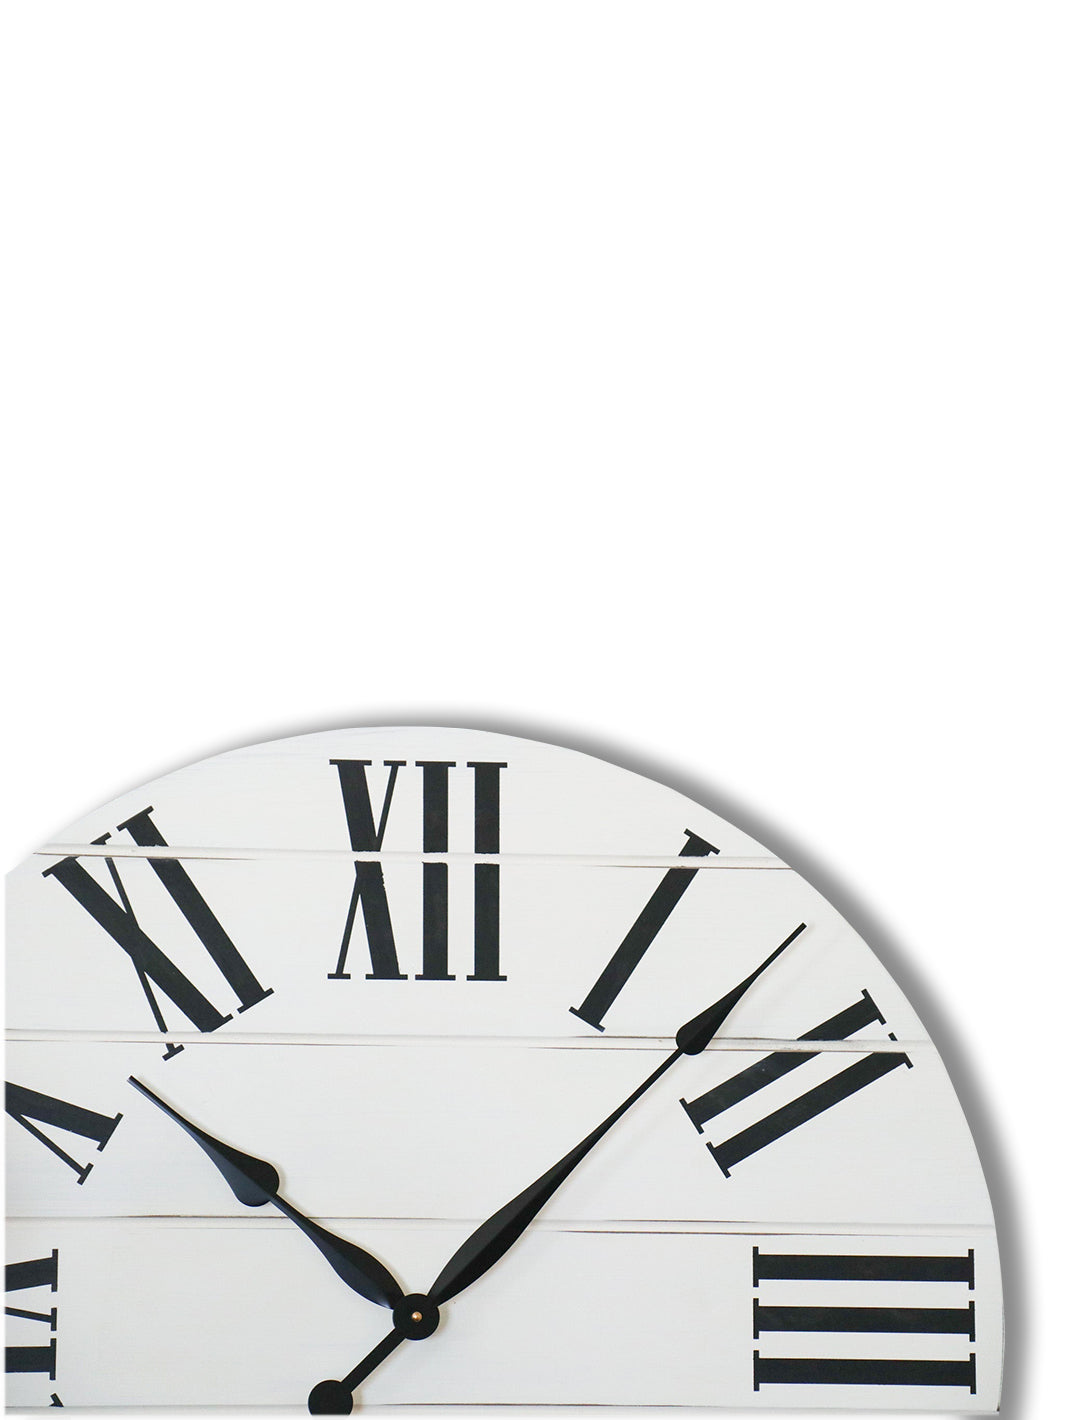 Simple 30" Farmhouse Style Large White Distressed Wall Clock with Black Roman Numerals (in stock) Earthly Comfort Clocks 2089-1